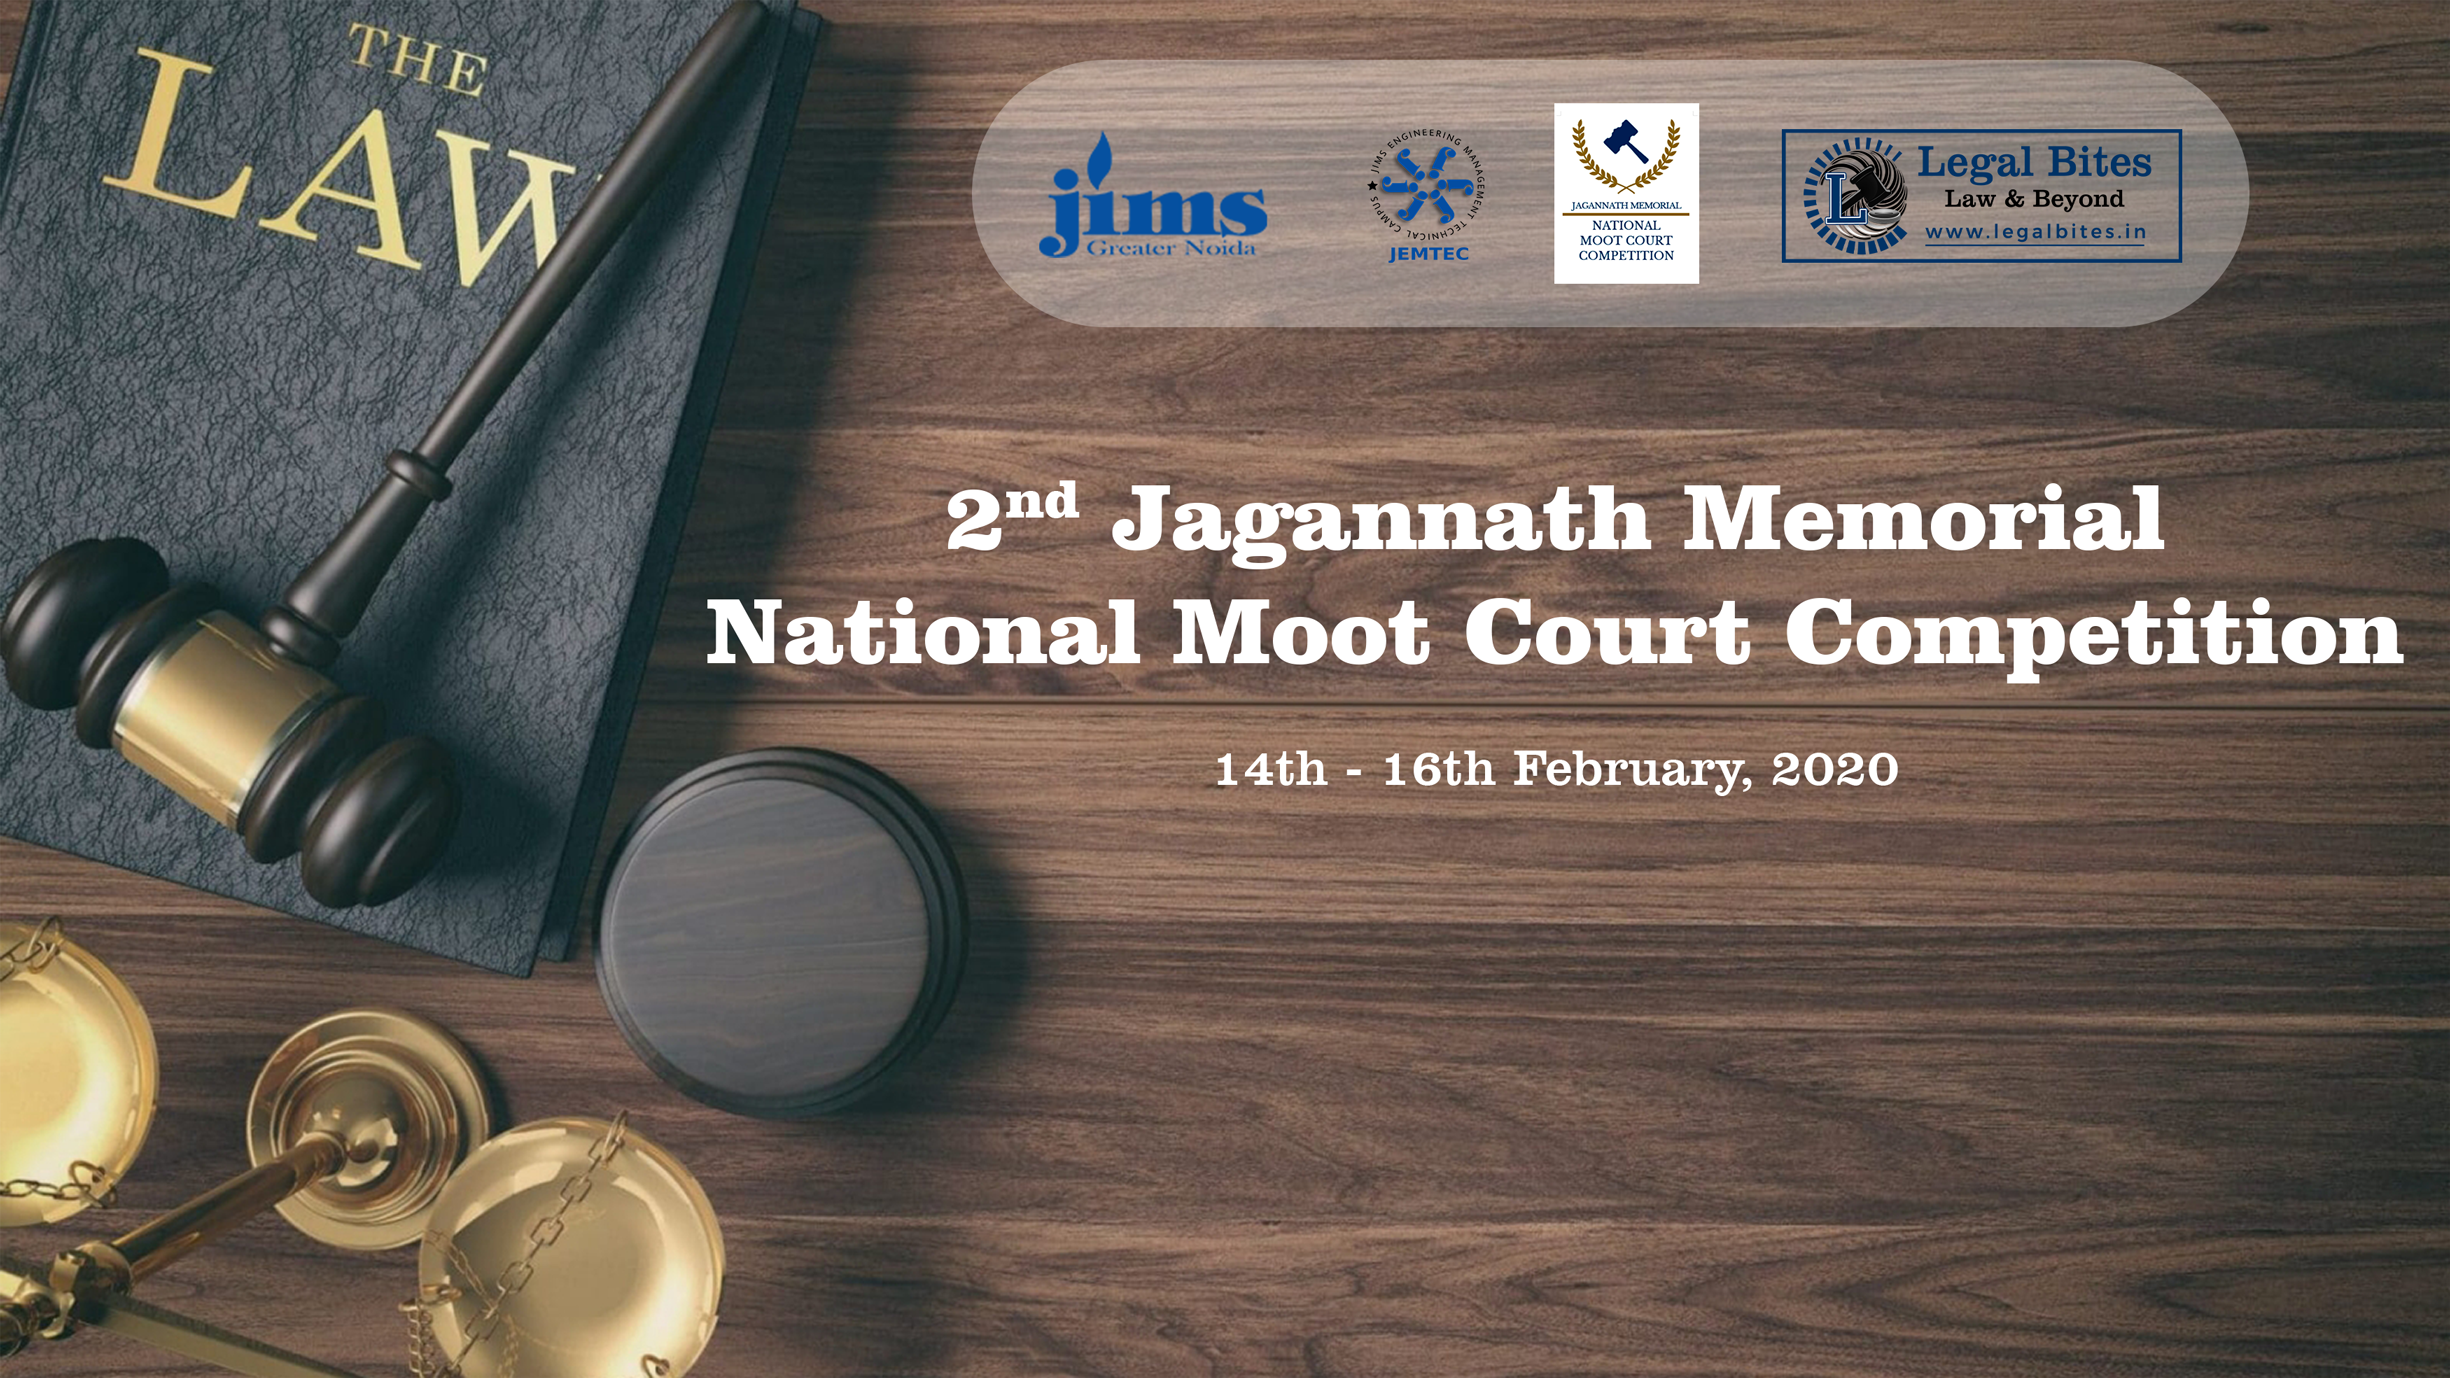 2nd Jagannath Memorial National Moot Court Competition